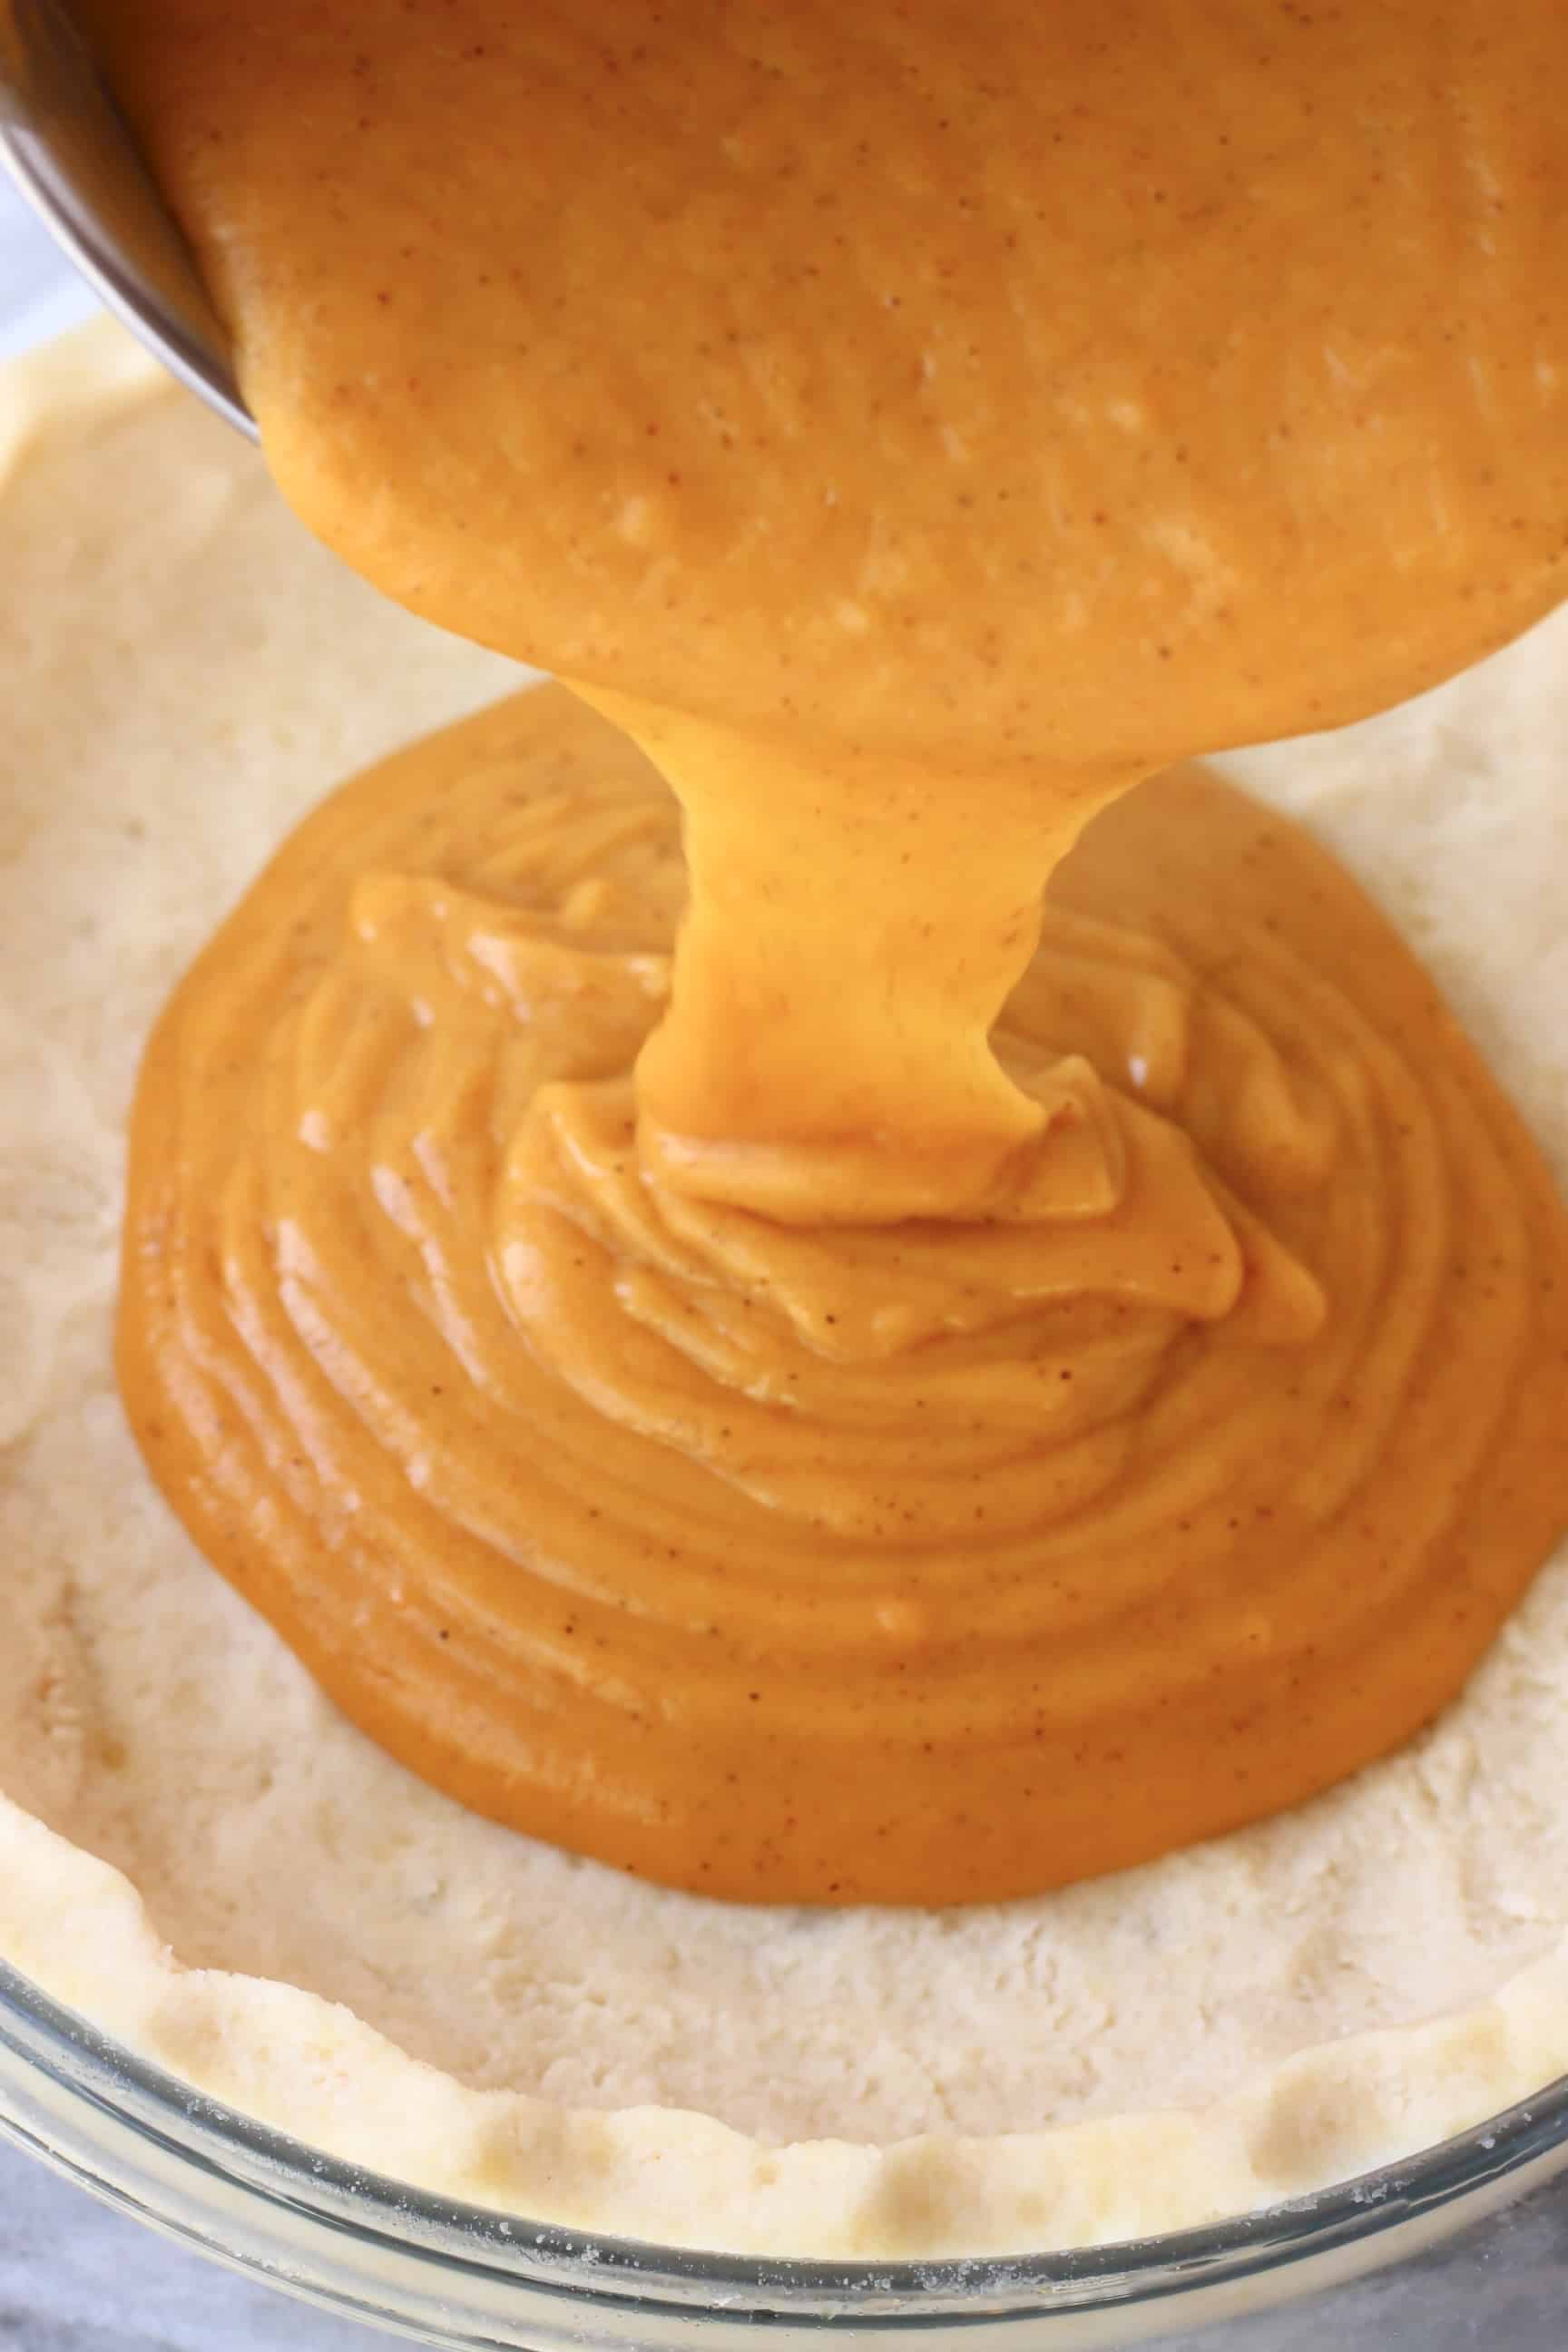 Orange vegan sweet potato pie filling being poured into a raw pastry crust in a pie dish